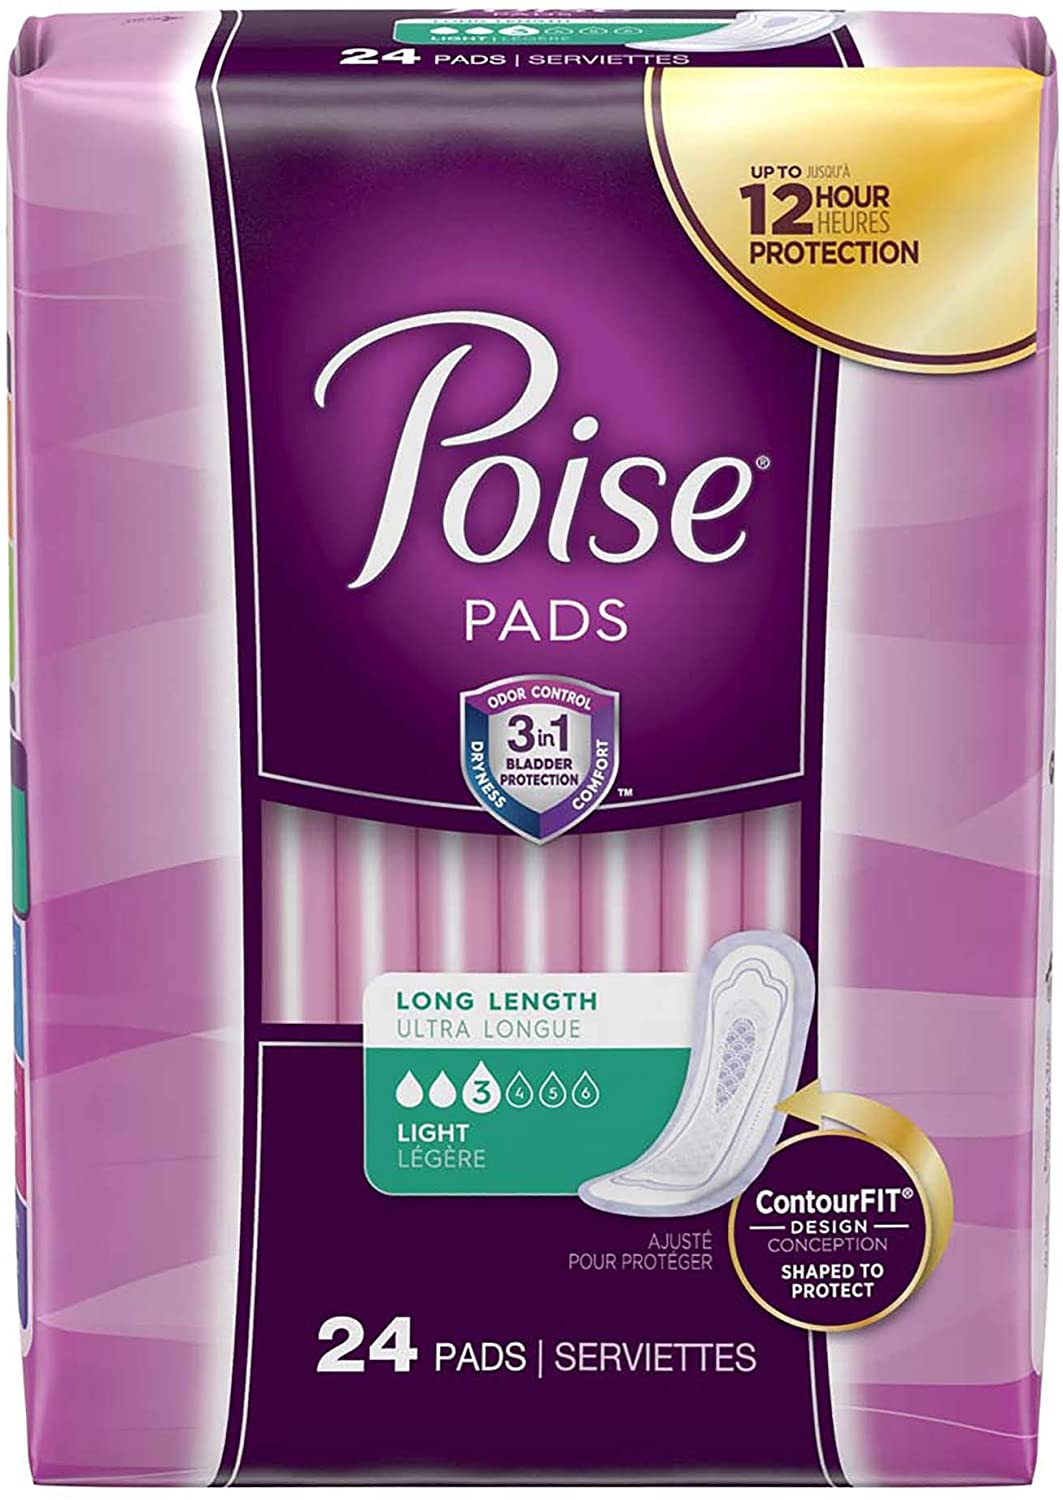 Poise Pads For Women WholeSale - Price List, Bulk Buy at